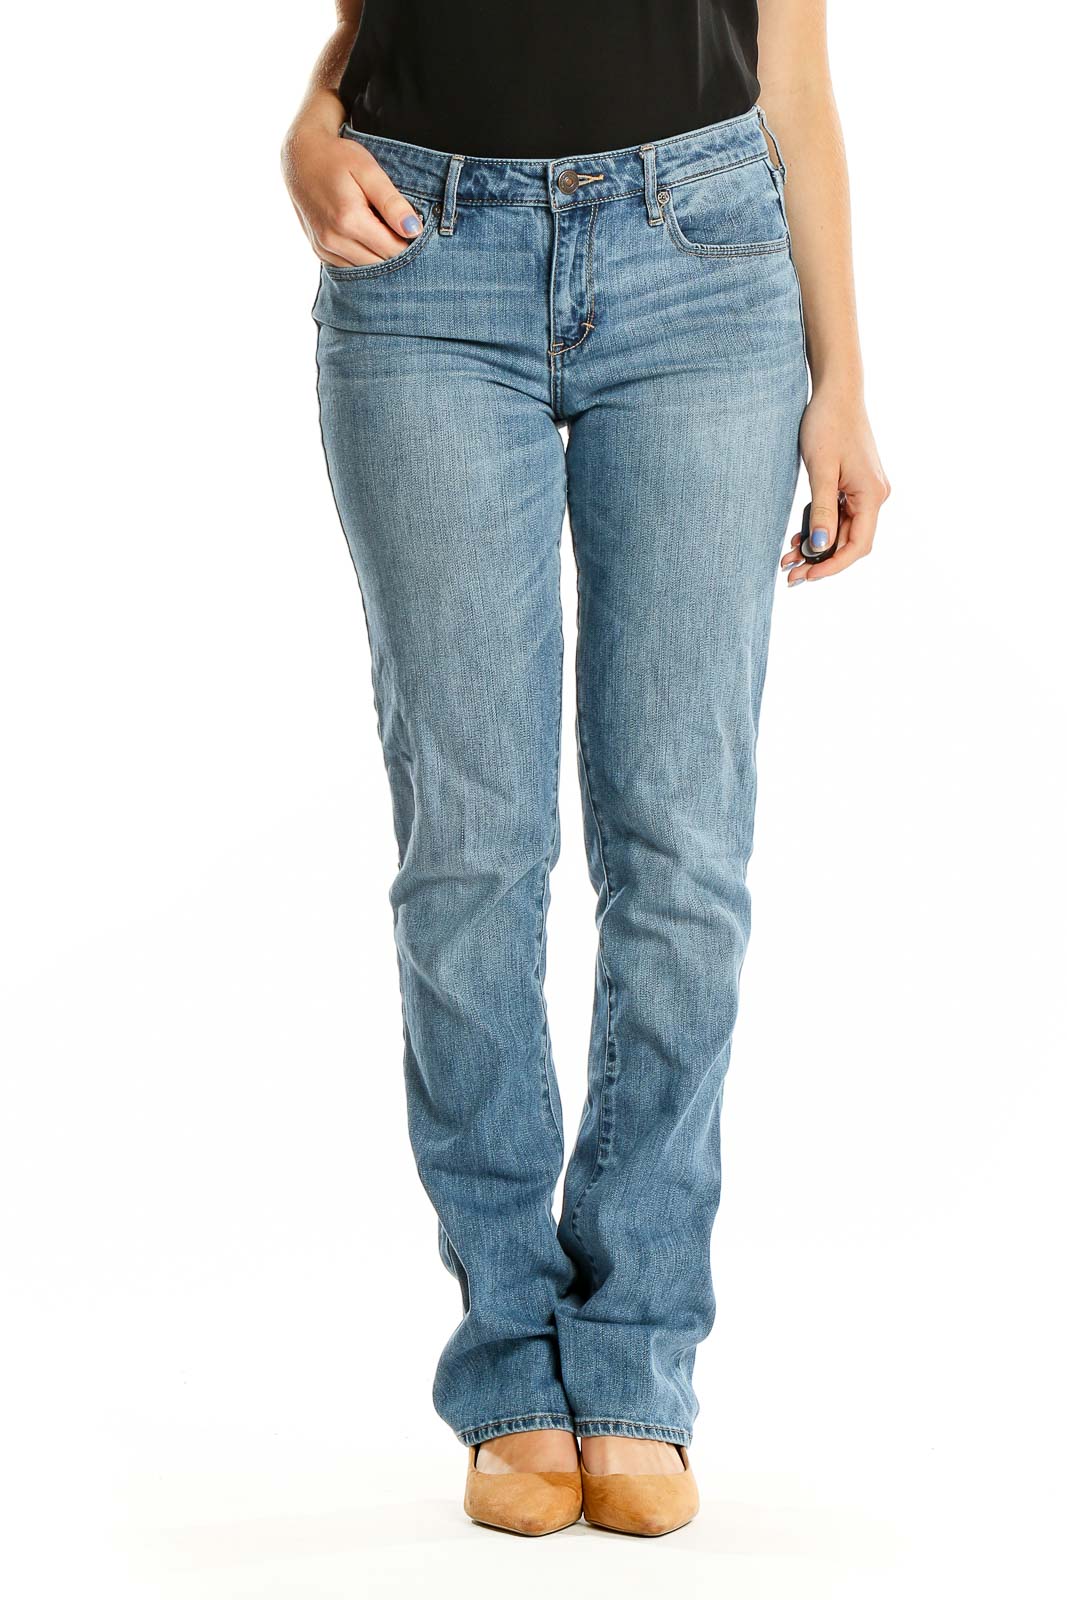 Blue Light Rinse Jeans Front